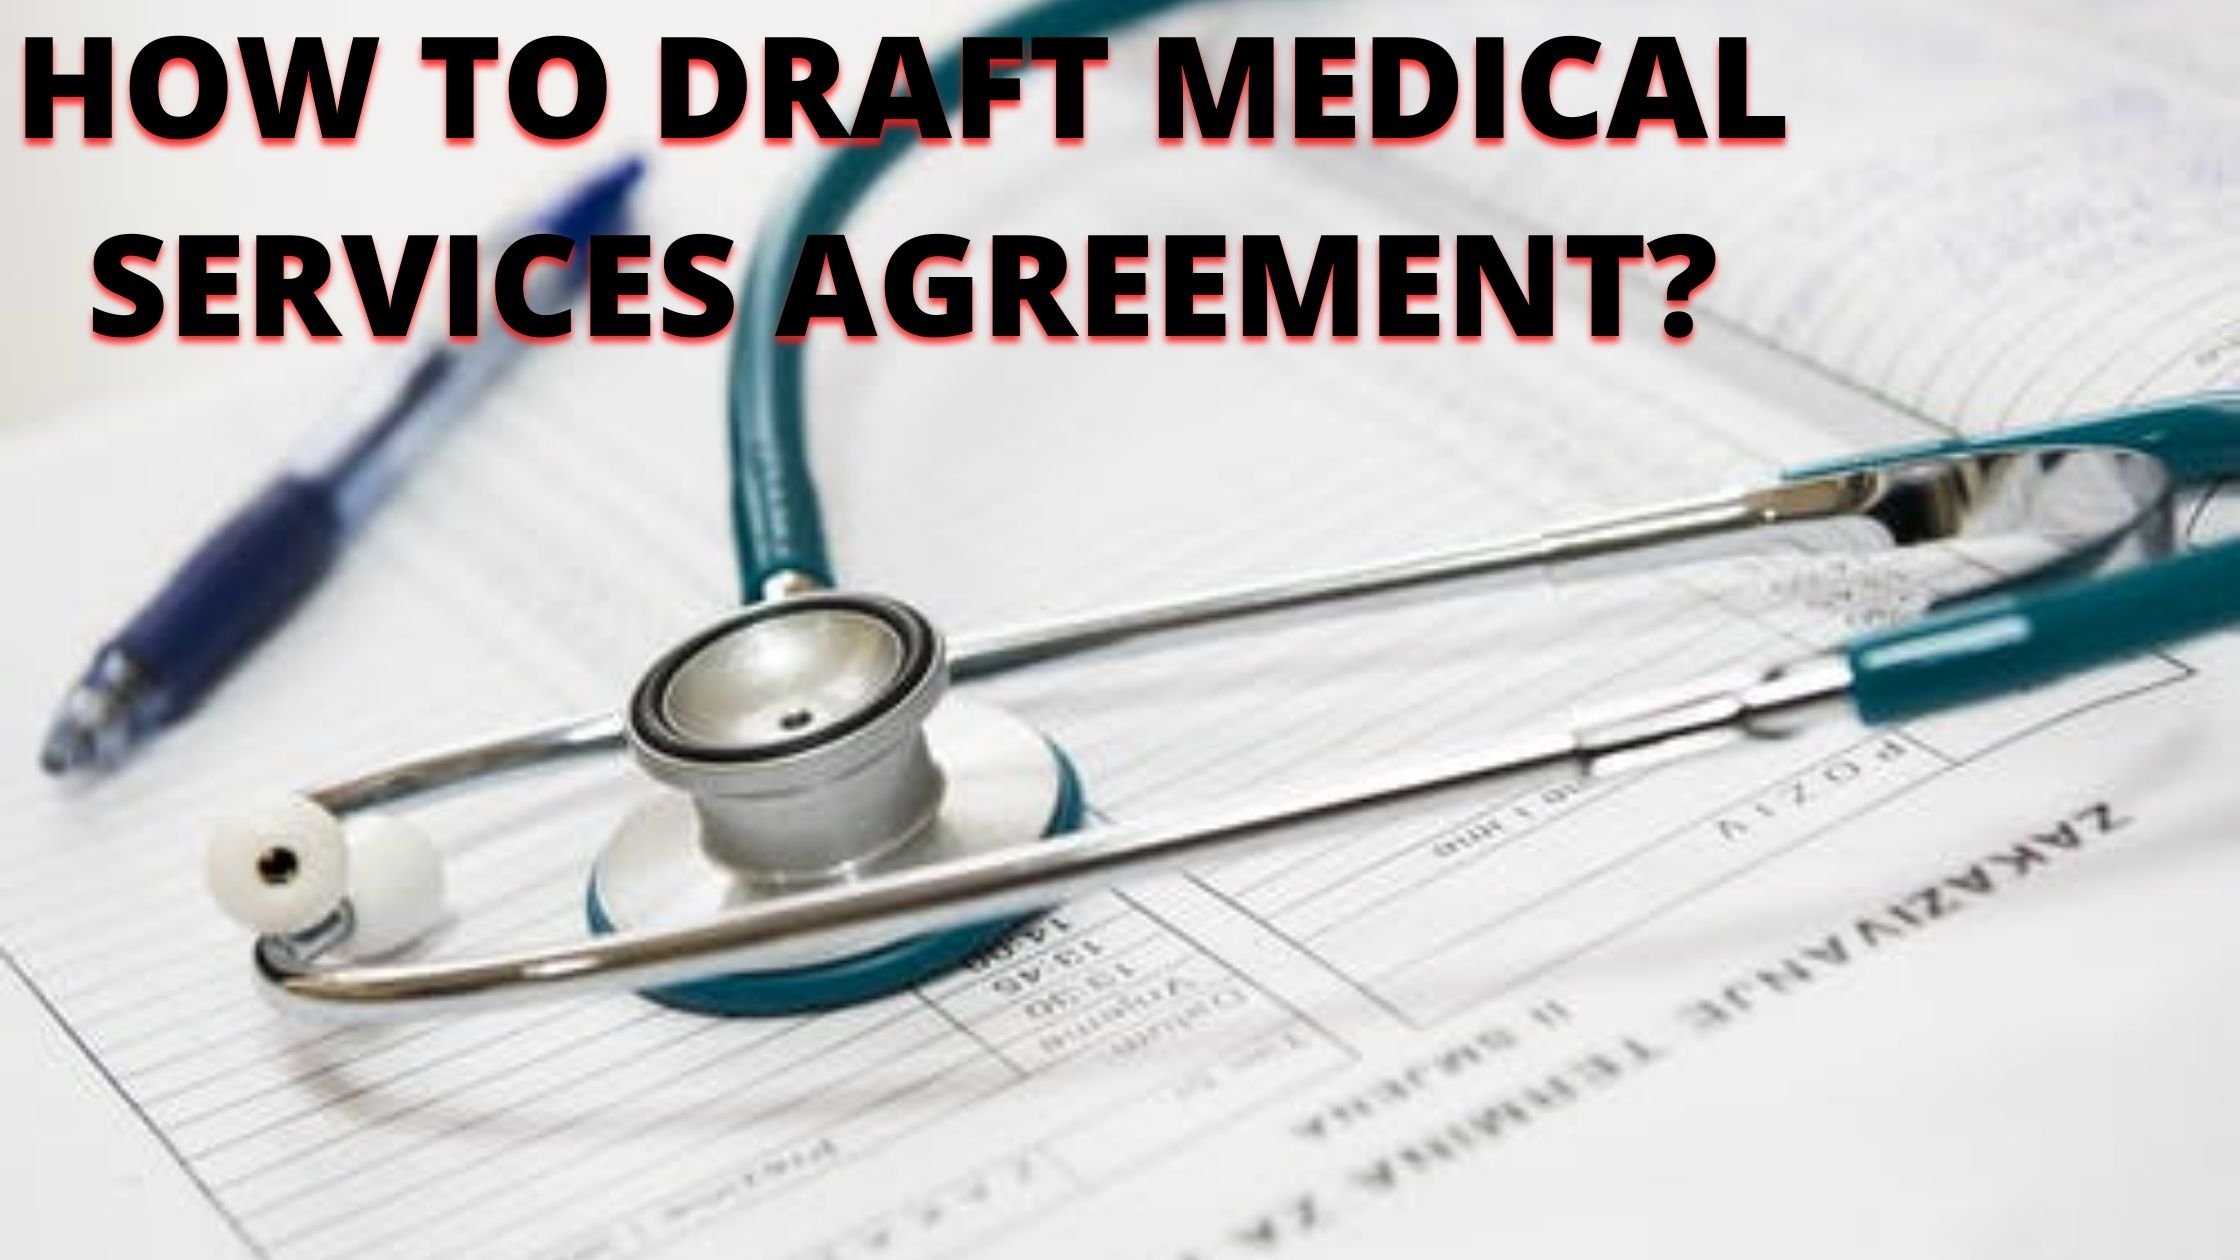  HOW TO DRAFT A MEDICAL SERVICES AGREEMENT?